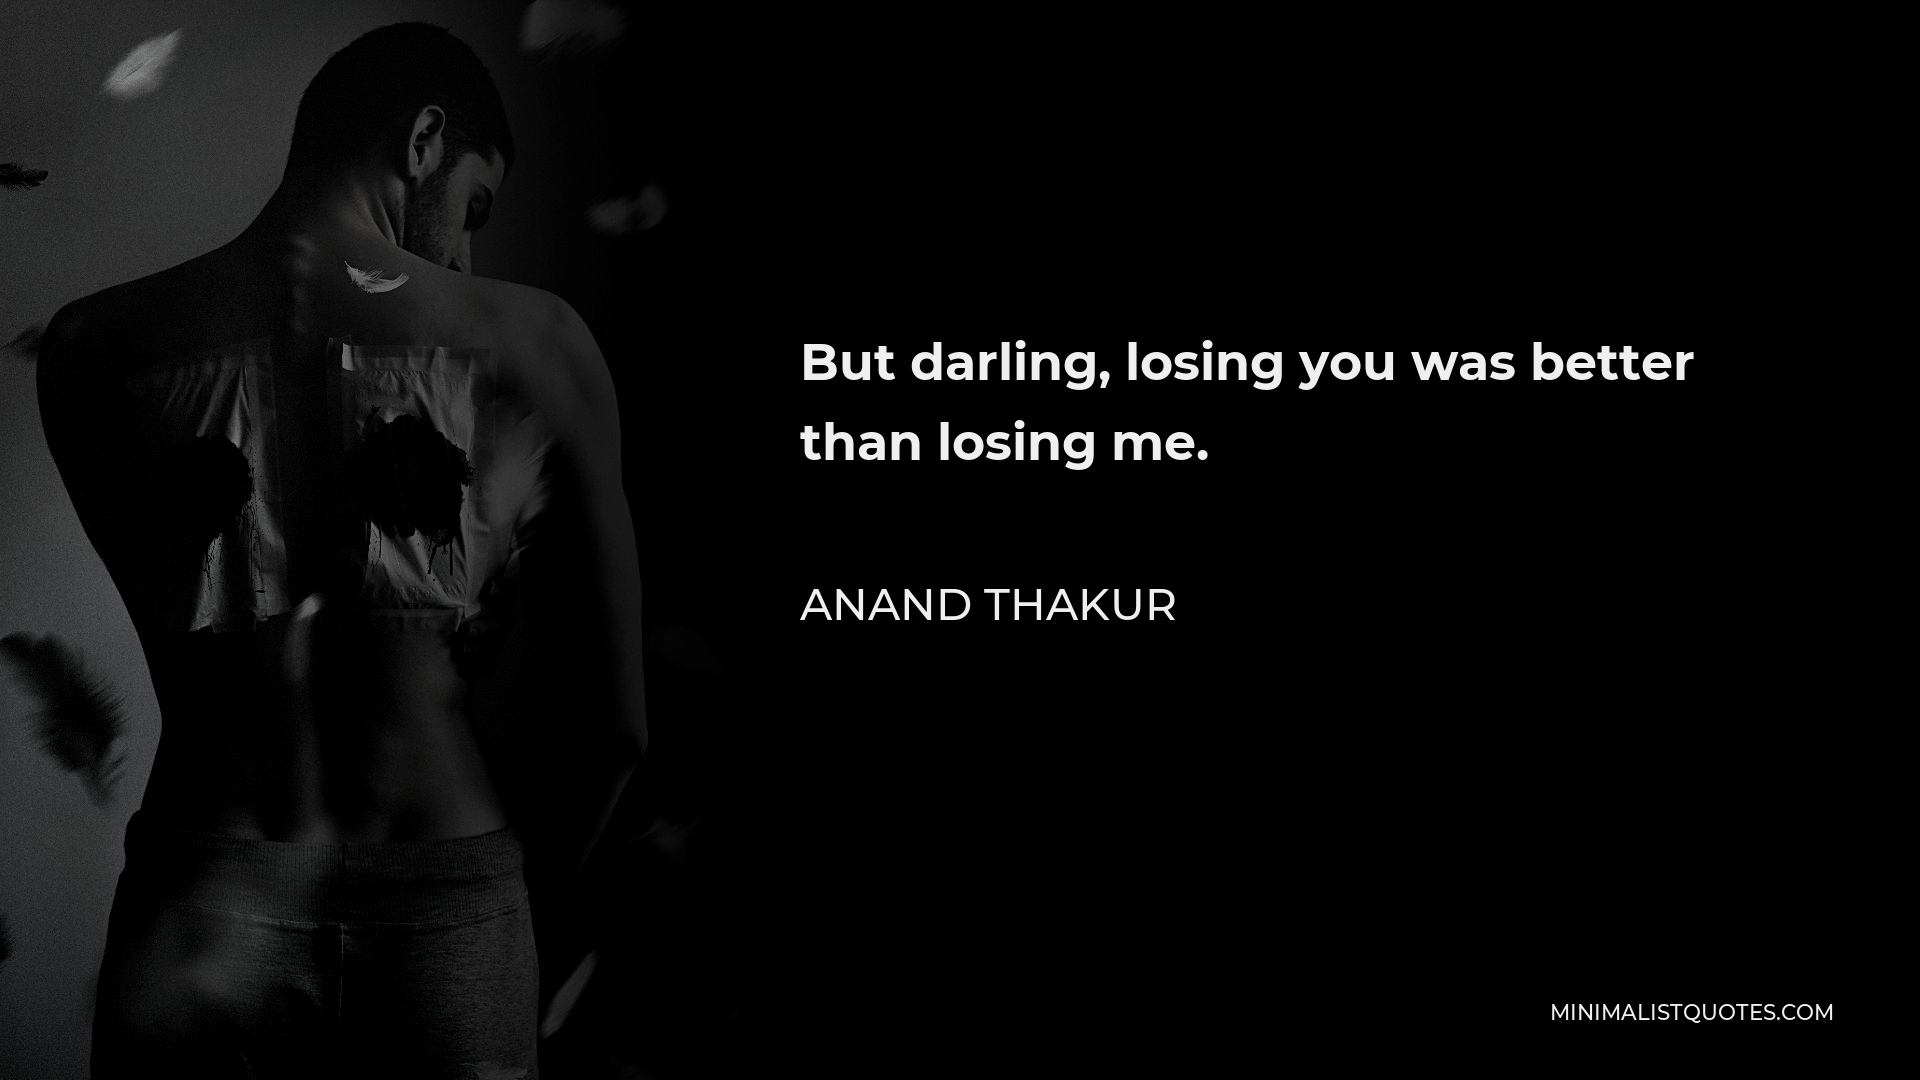 Anand Thakur Quote - But darling, losing you was better than losing me.